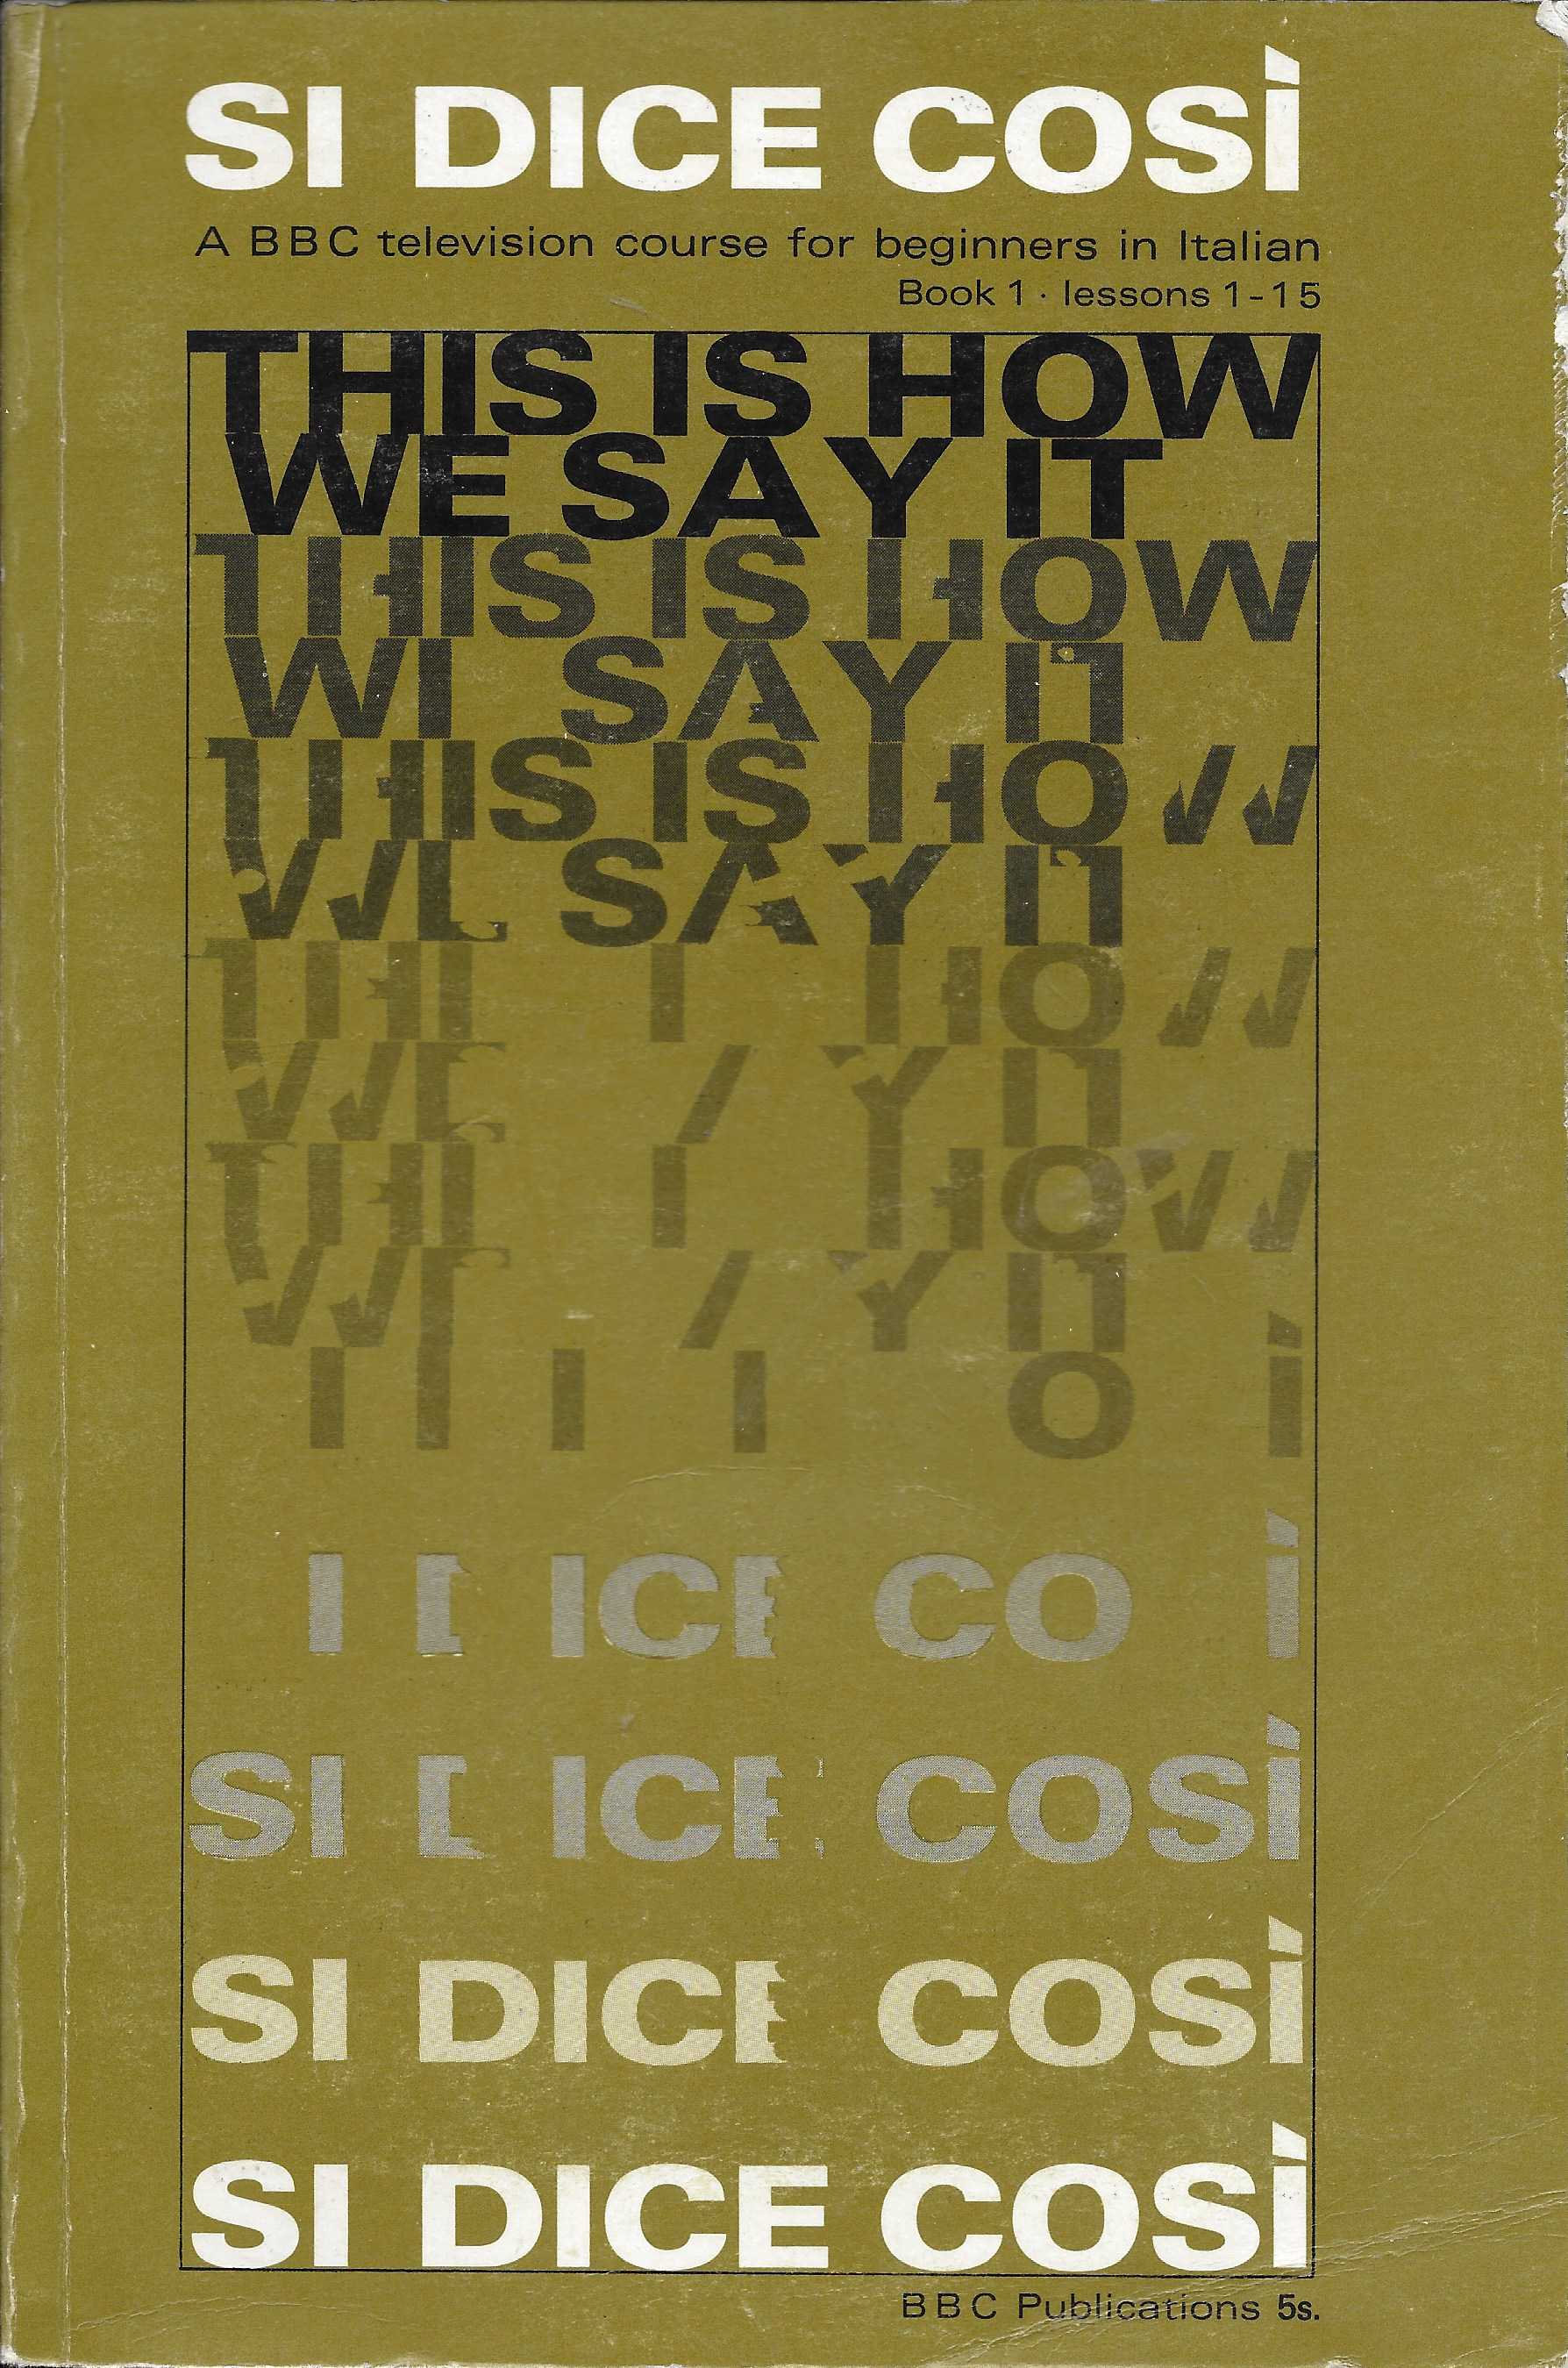 Picture of Si dice cosi - Book 1 by artist Joseph Cremona from the BBC books - Records and Tapes library